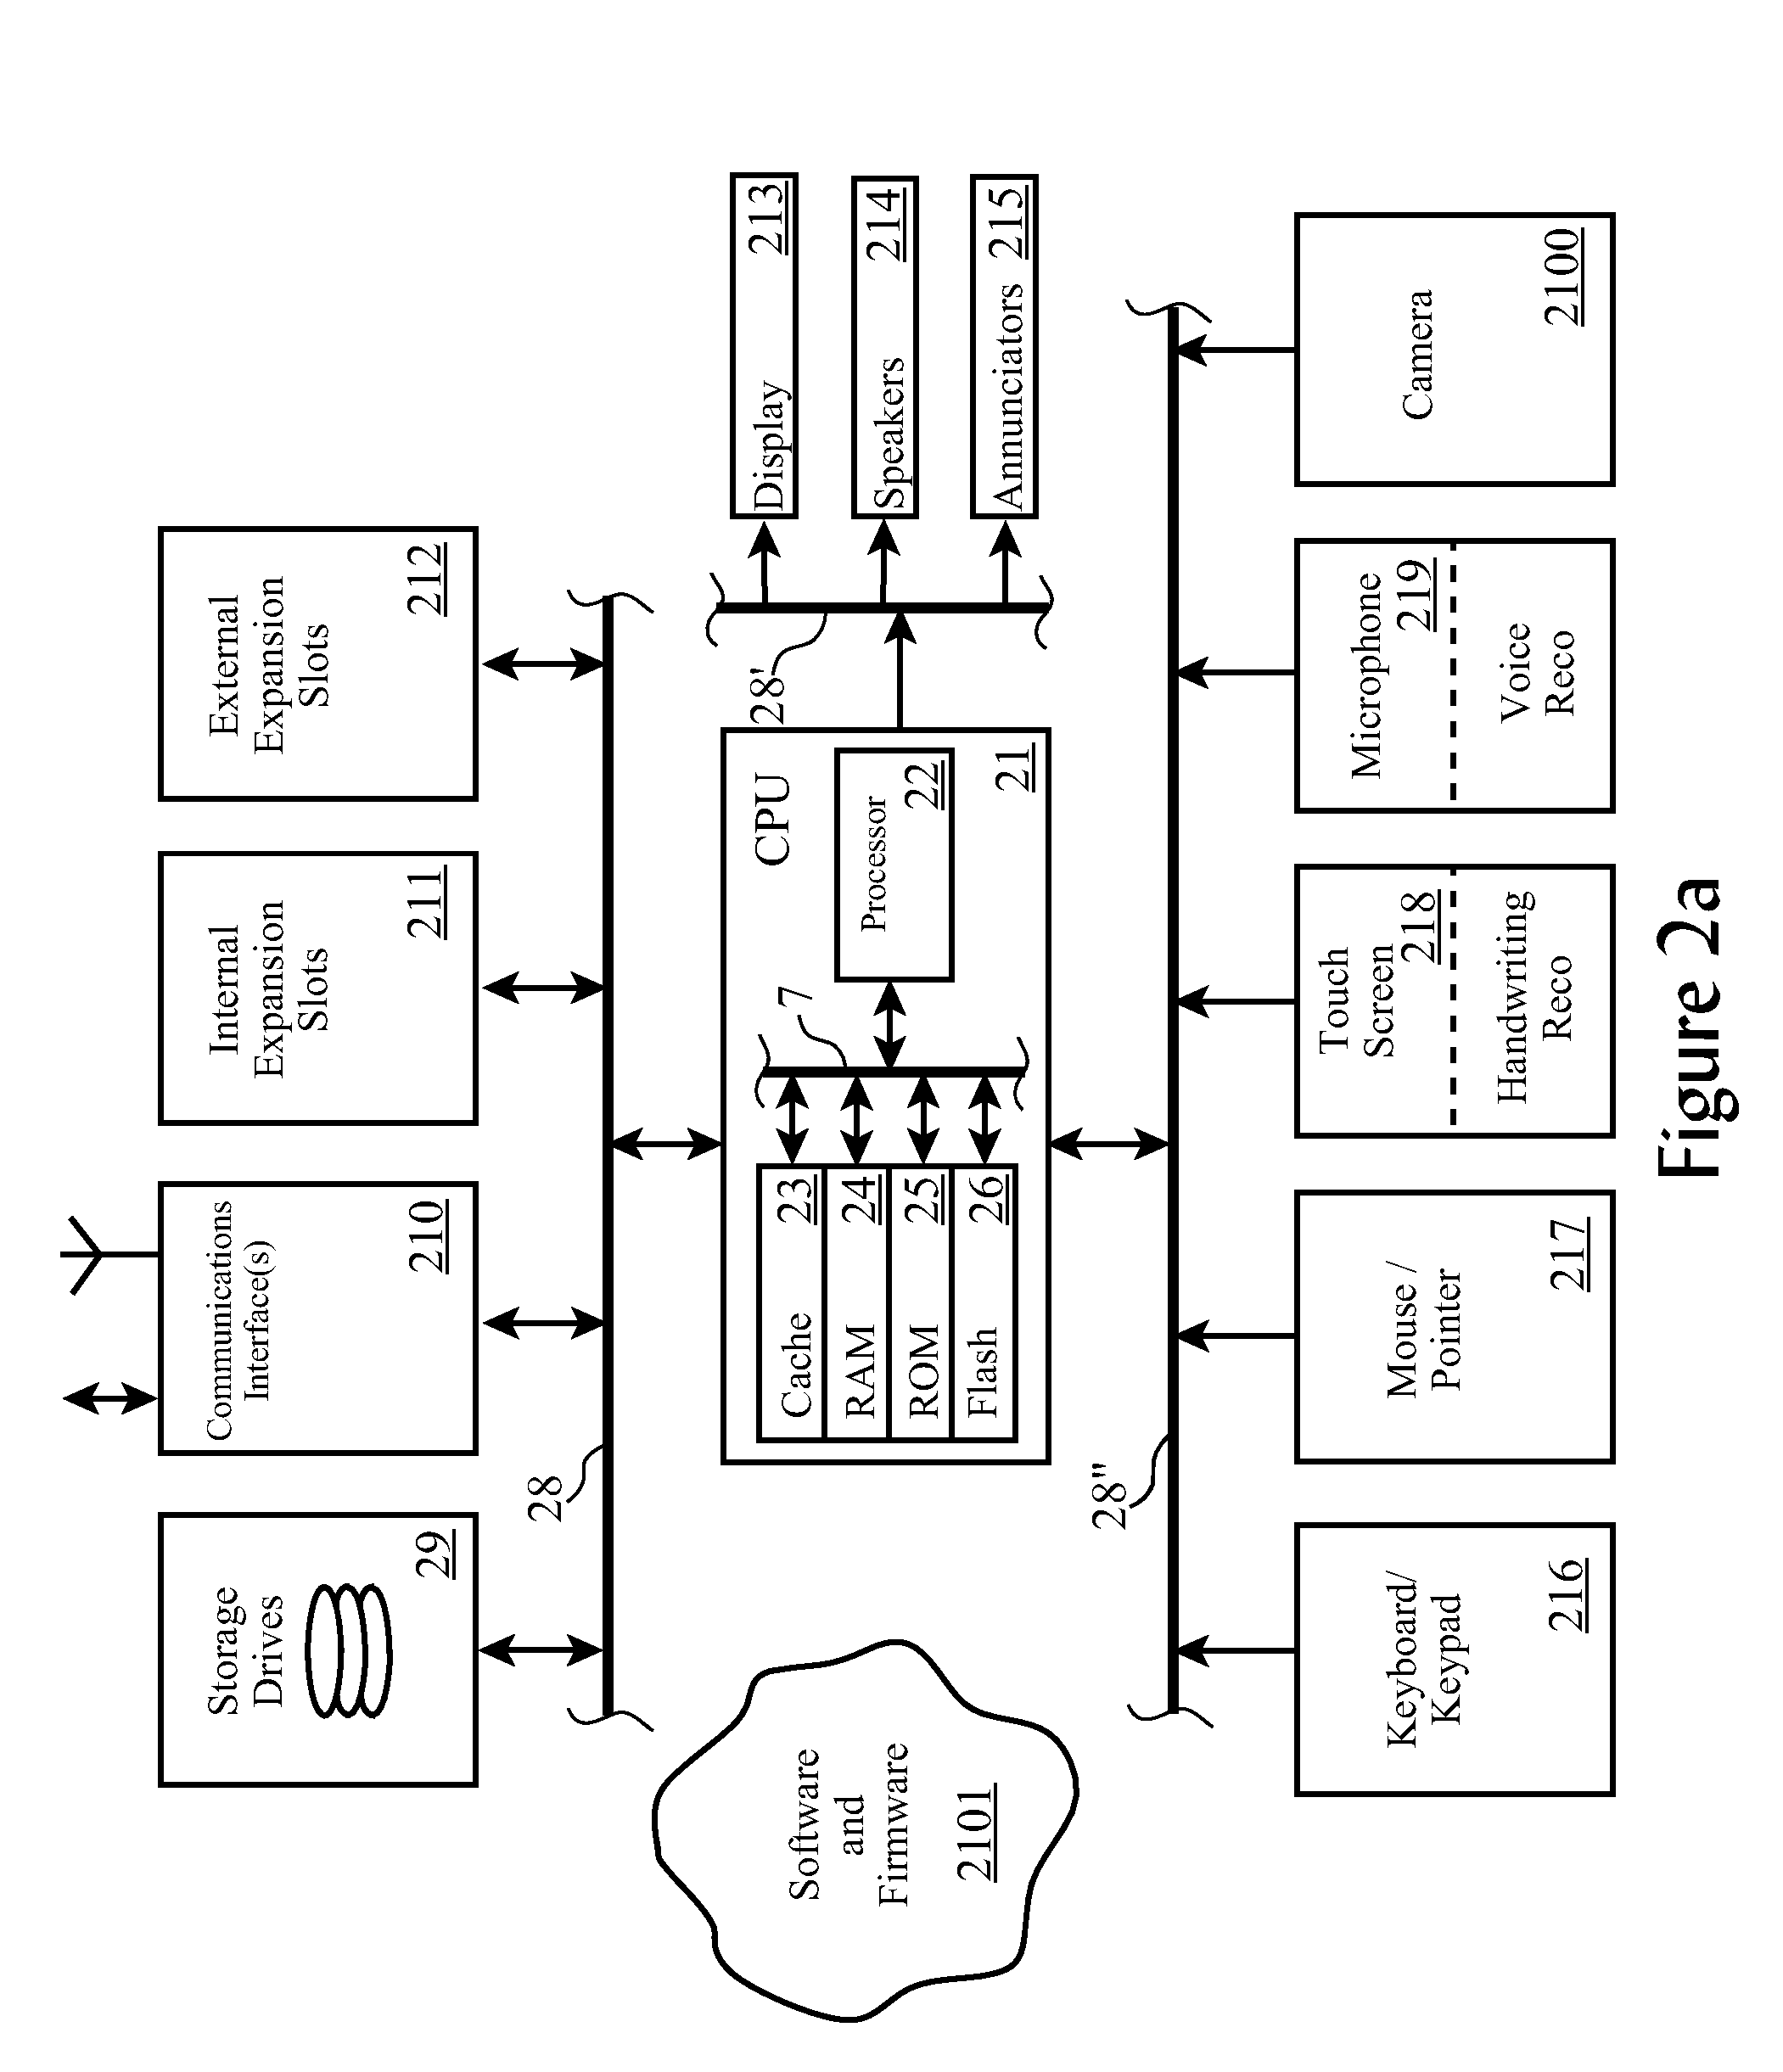 System and method for controlling, configuring, and disabling devices in a healthcare system